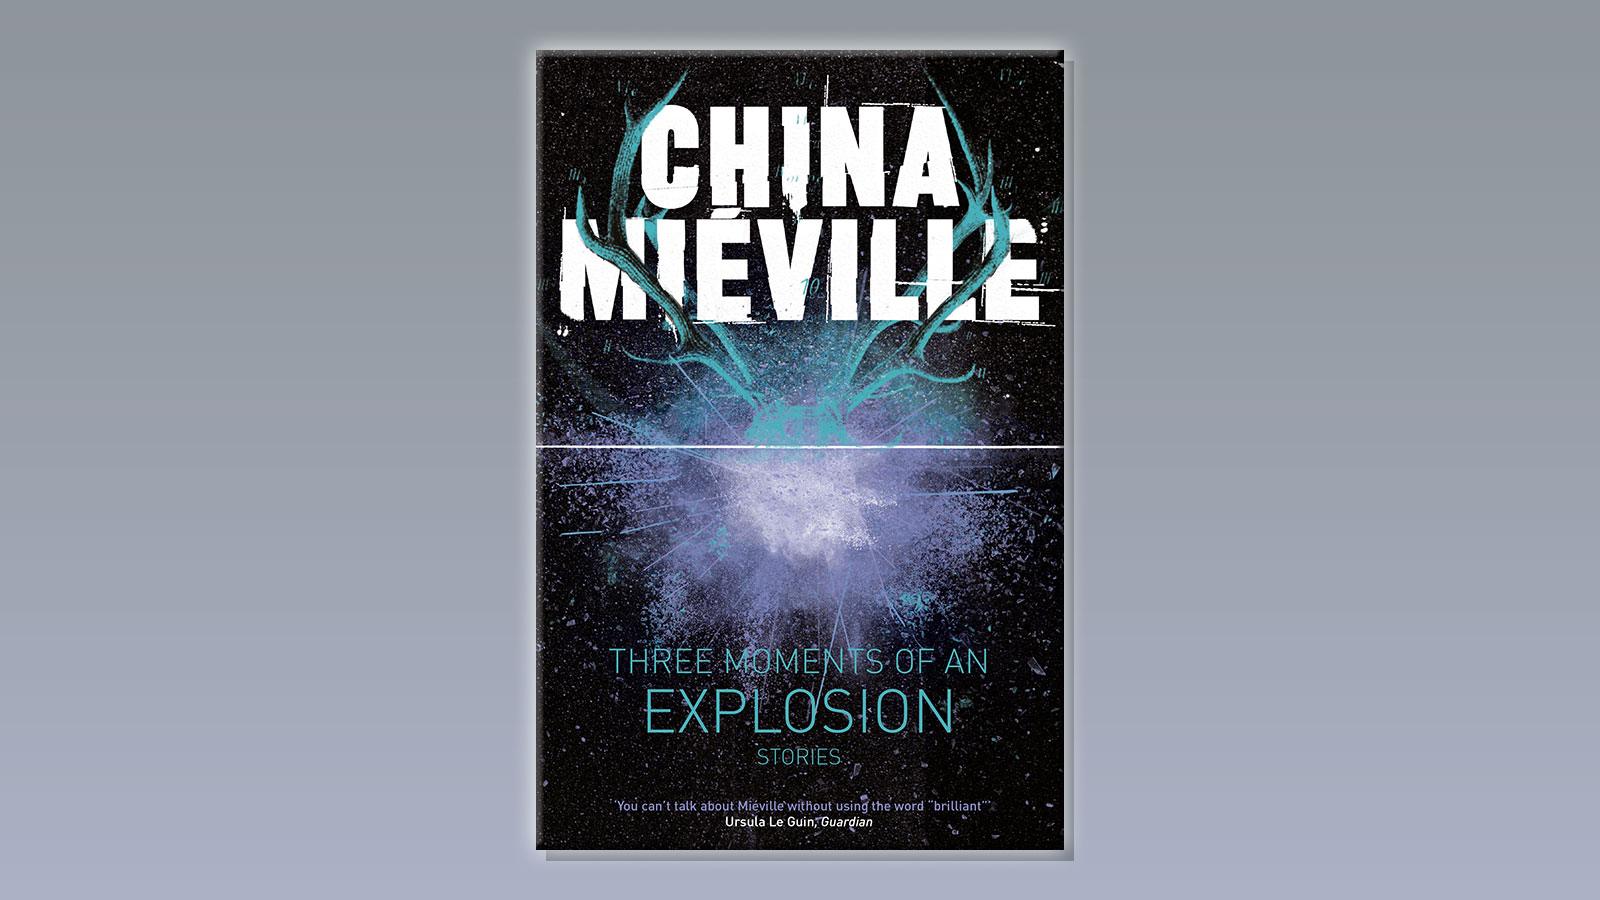 Three Moments of an Explosion by China Mieville on a pale grey background.